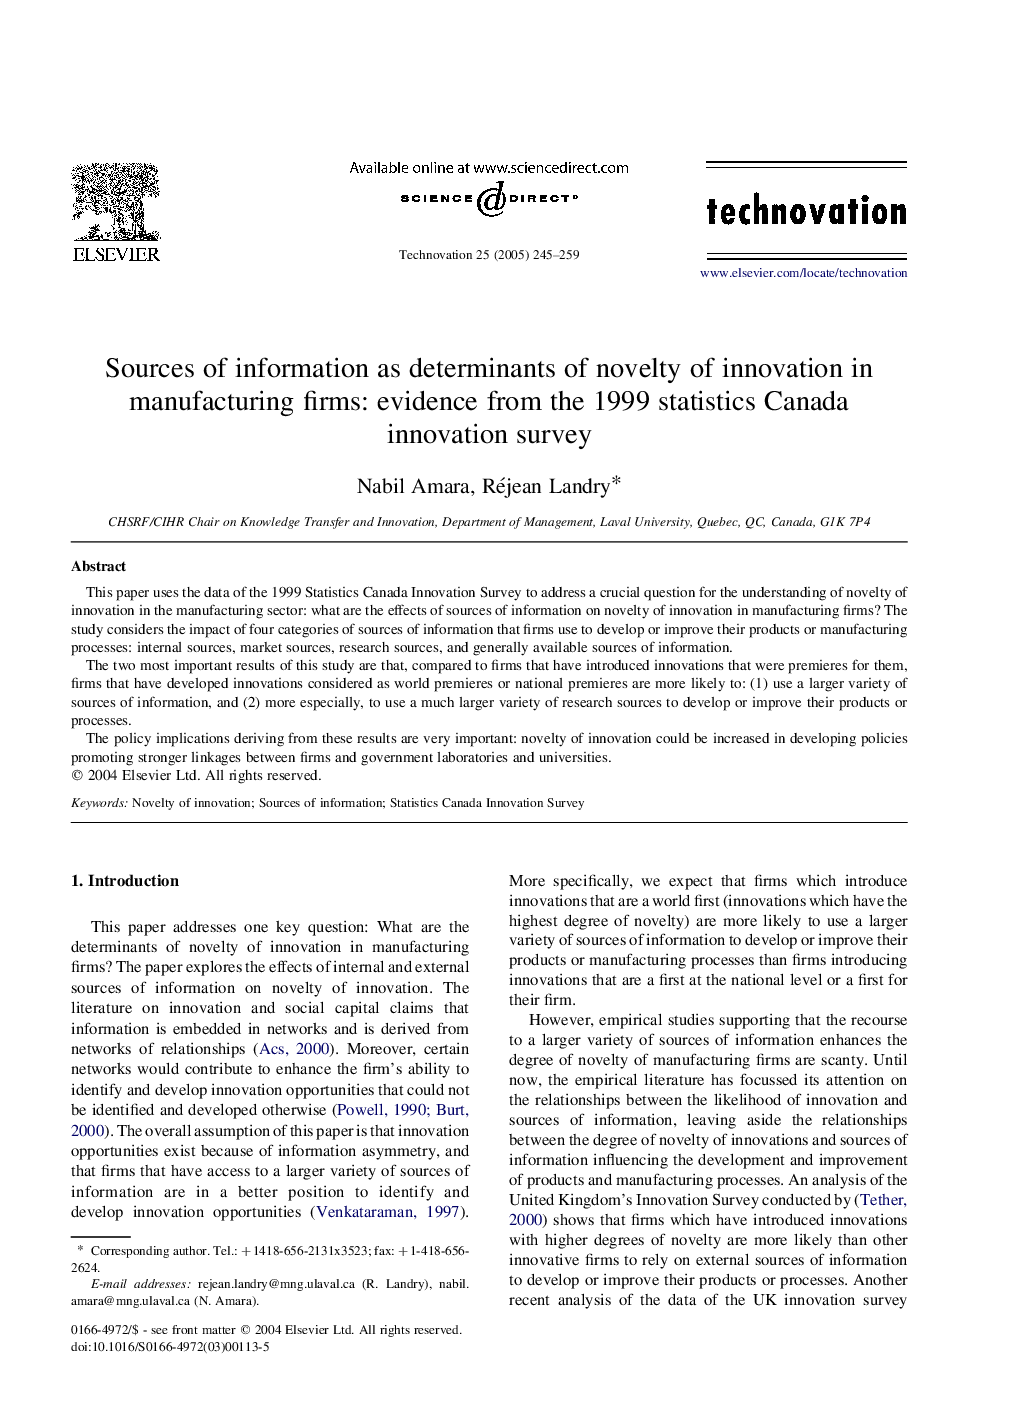 Sources of information as determinants of novelty of innovation in manufacturing firms: evidence from the 1999 statistics Canada innovation survey